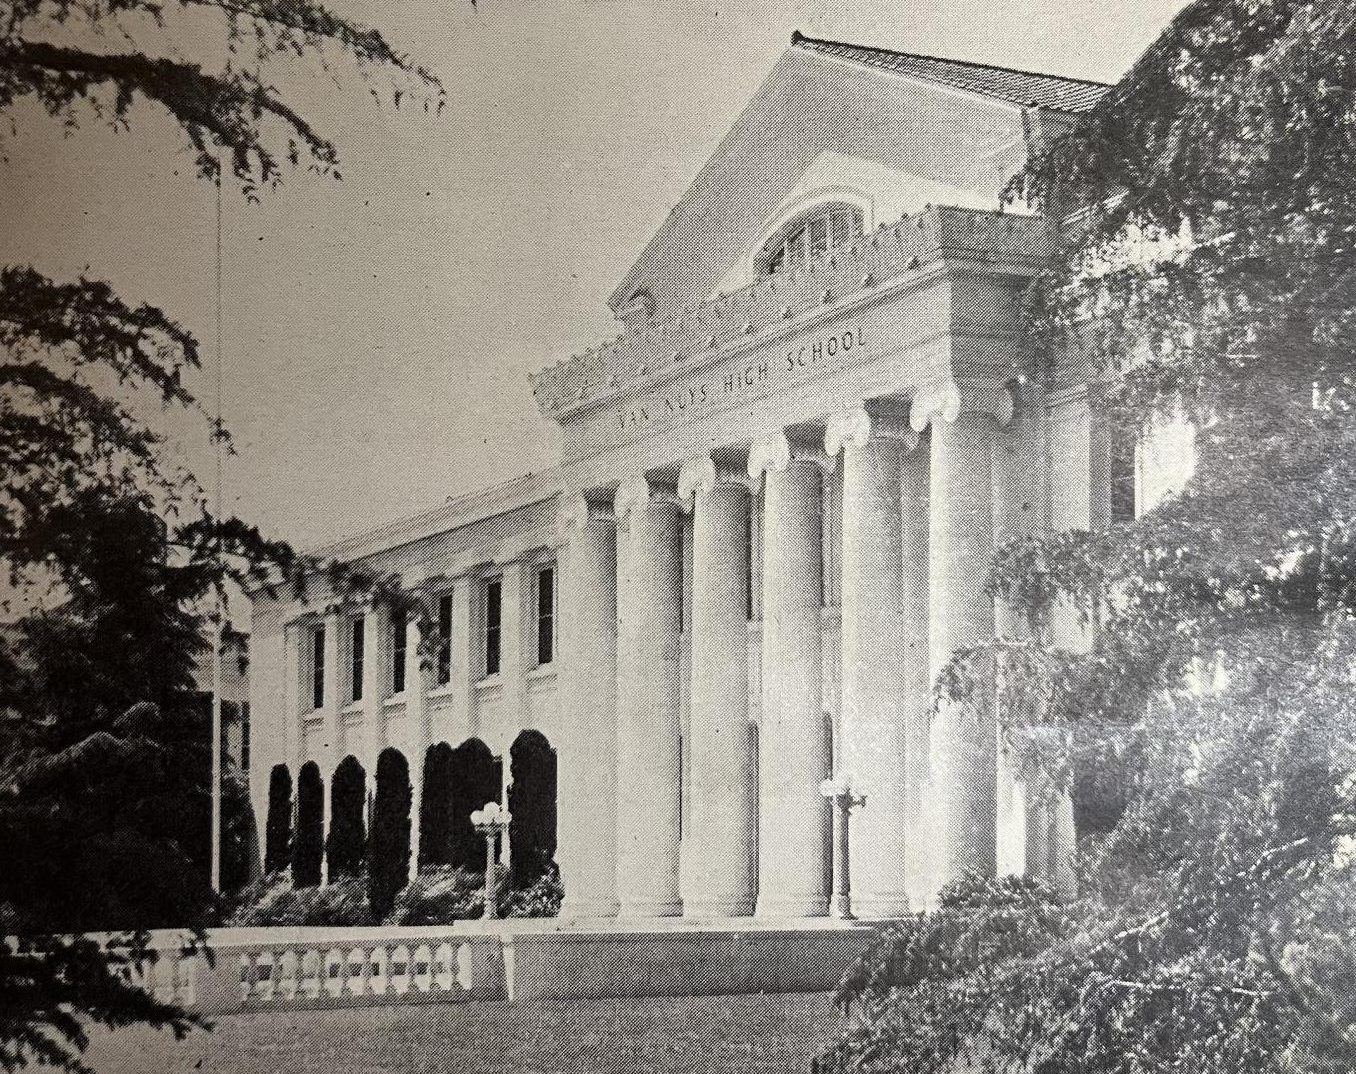 The front of the school in 1936, as Donna Hubbard would have seen it.